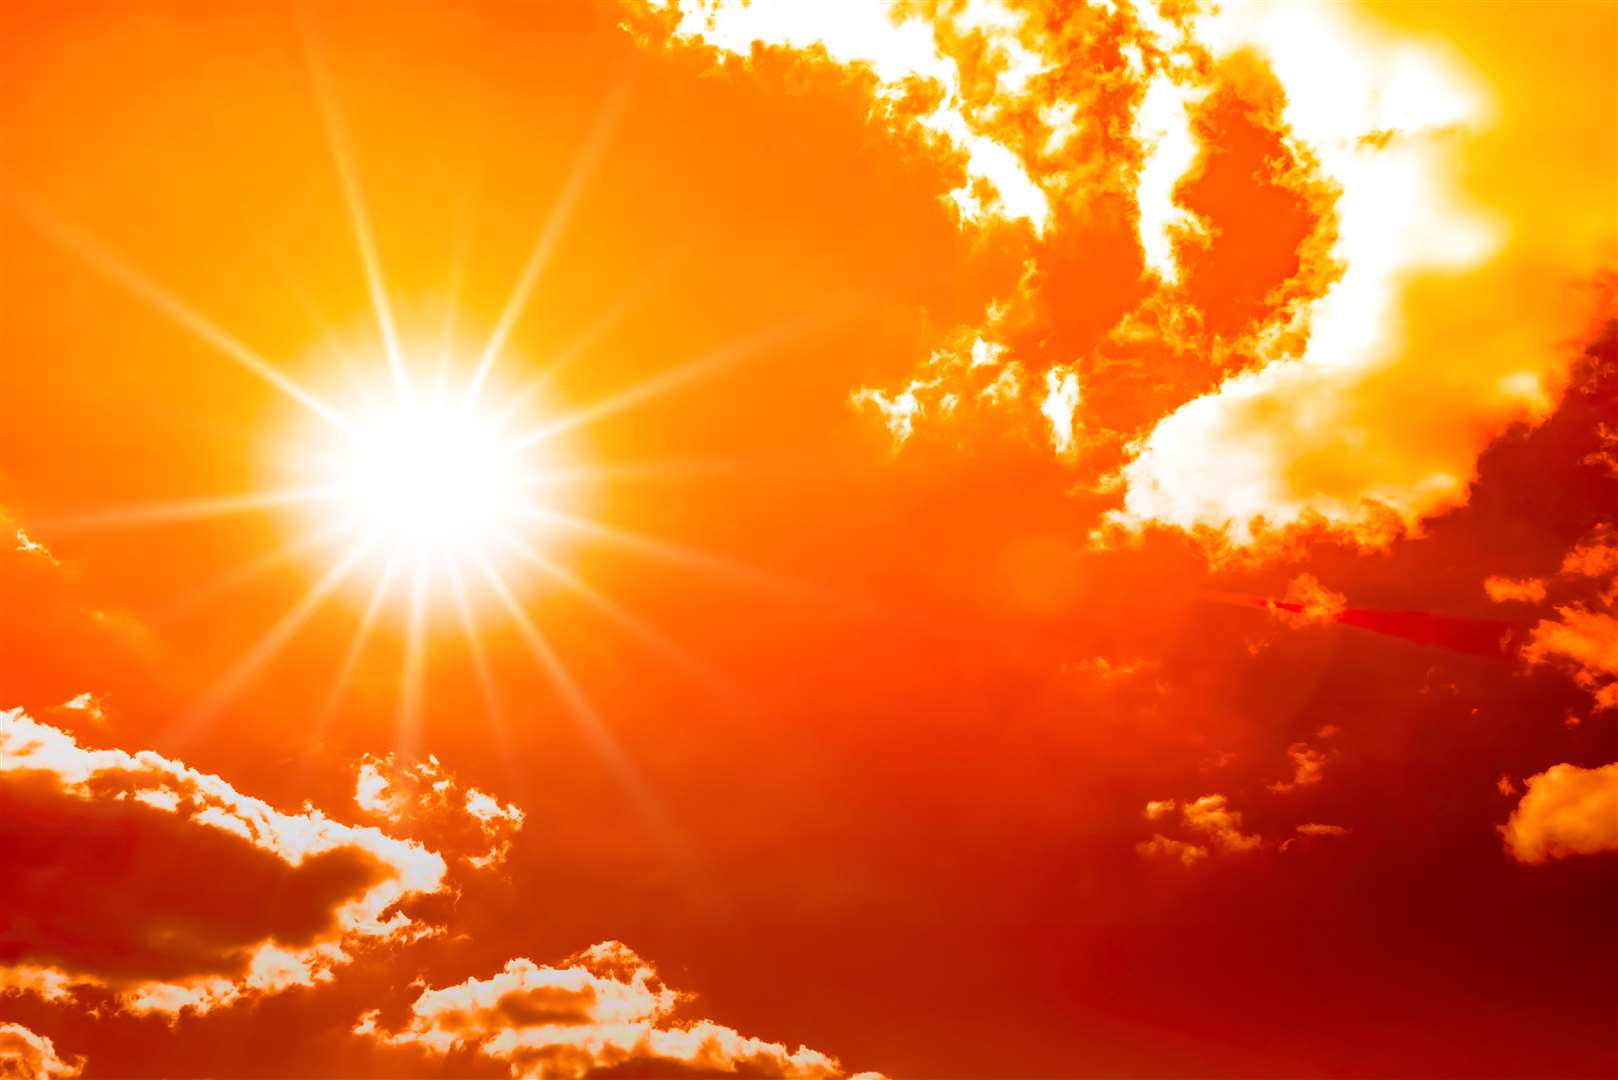 The Met Office has triggered a heat alert warning affecting large parts of the county